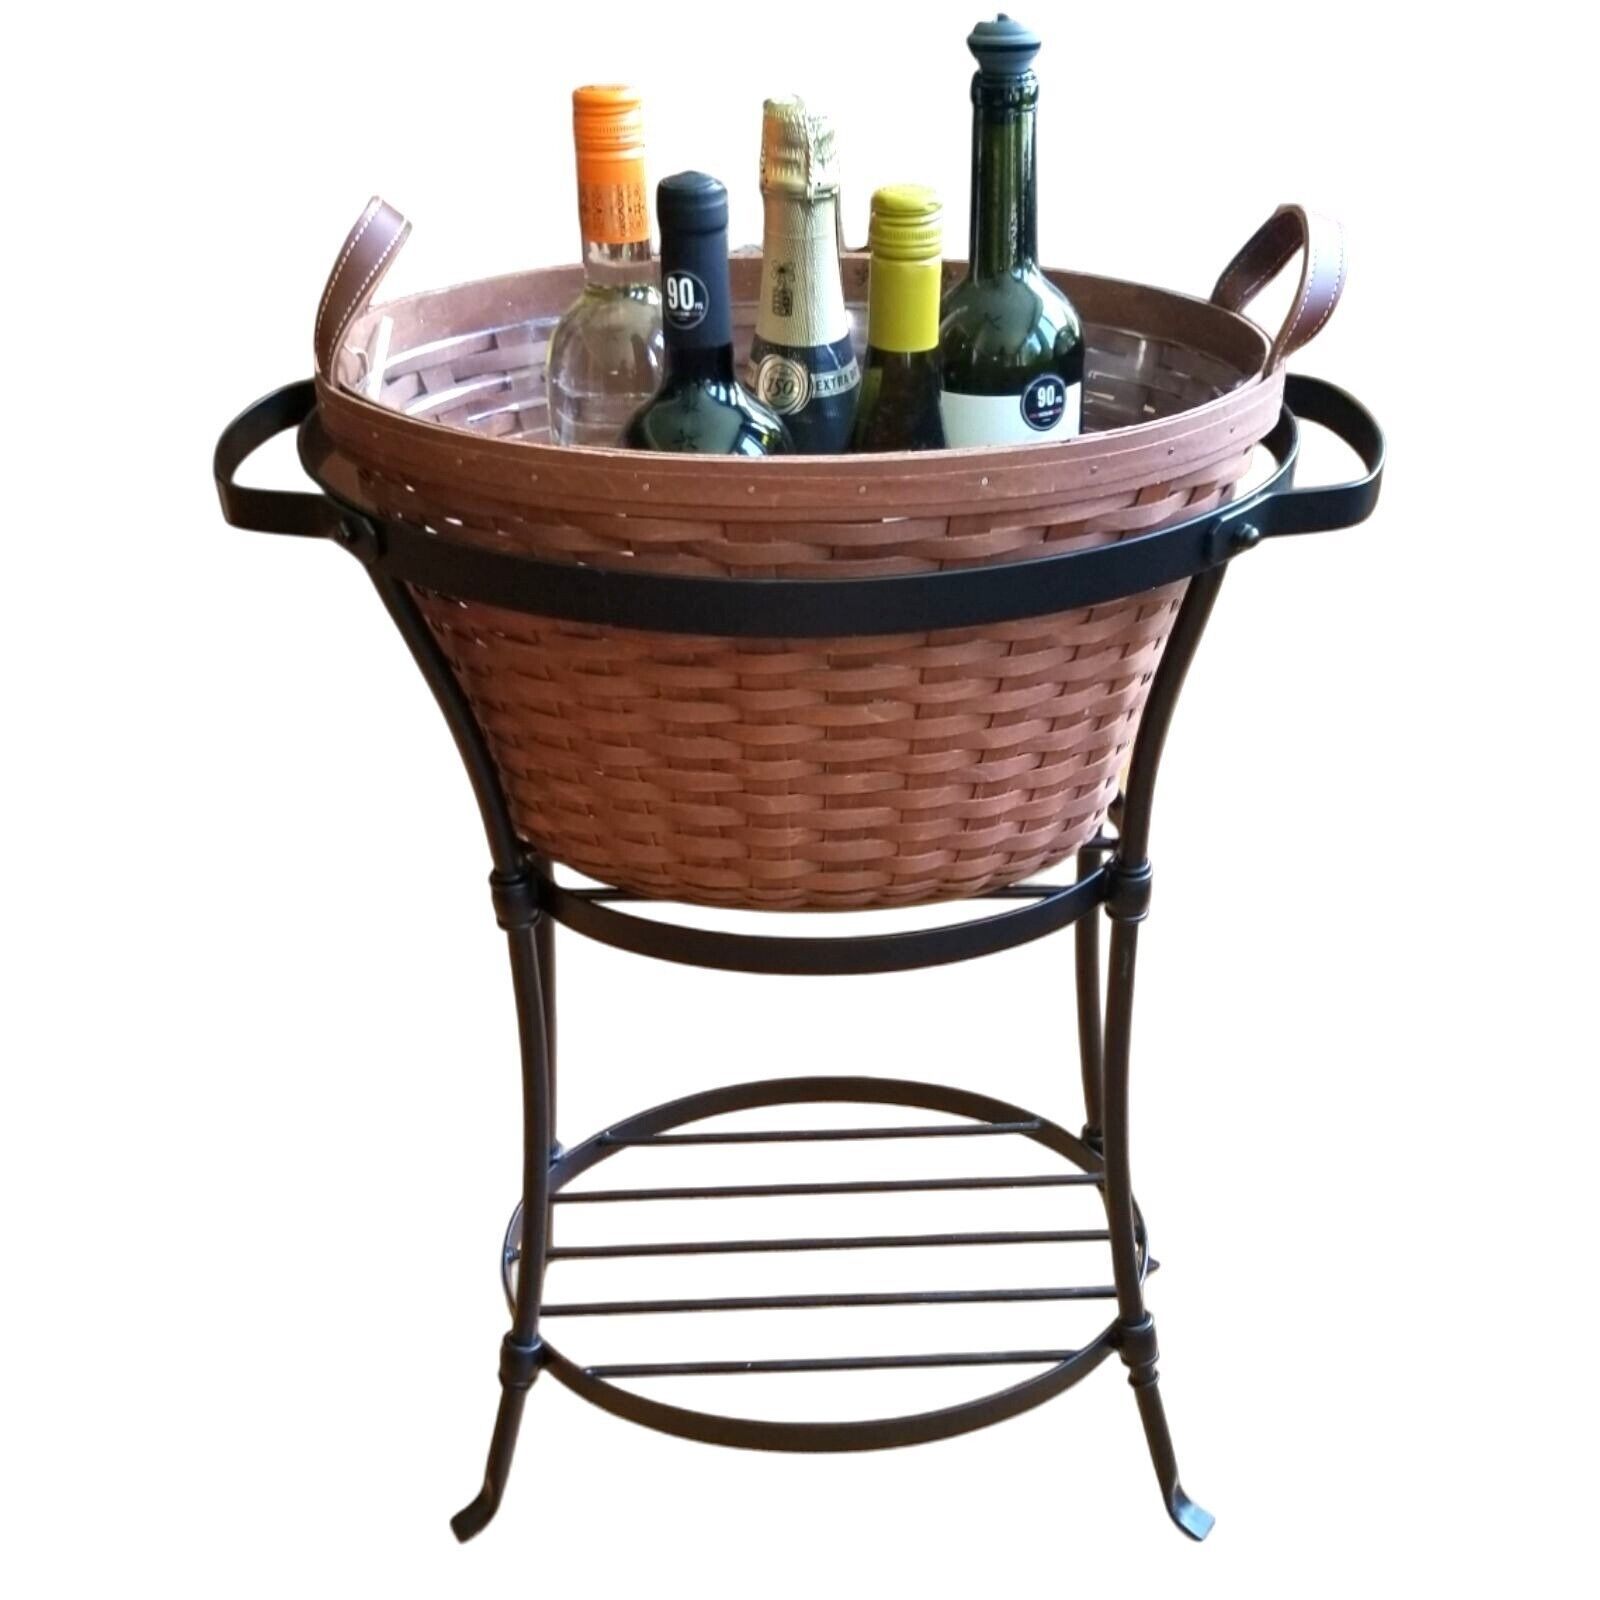 RARE NWT Longaberger XL Beverage Basket Liner Wrought Iron Stand Leather Handles